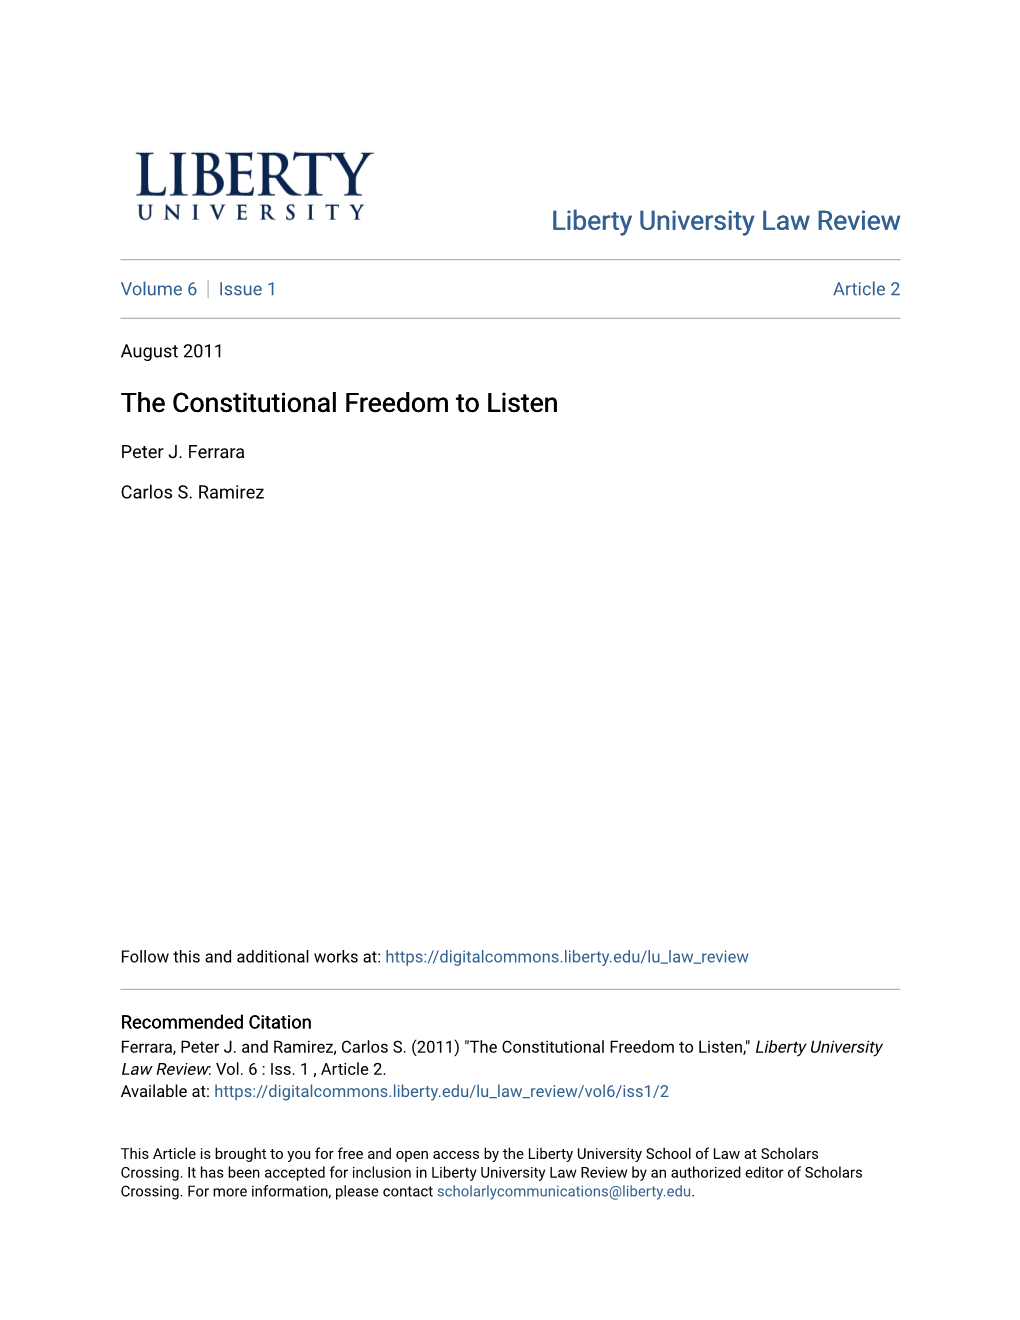 The Constitutional Freedom to Listen